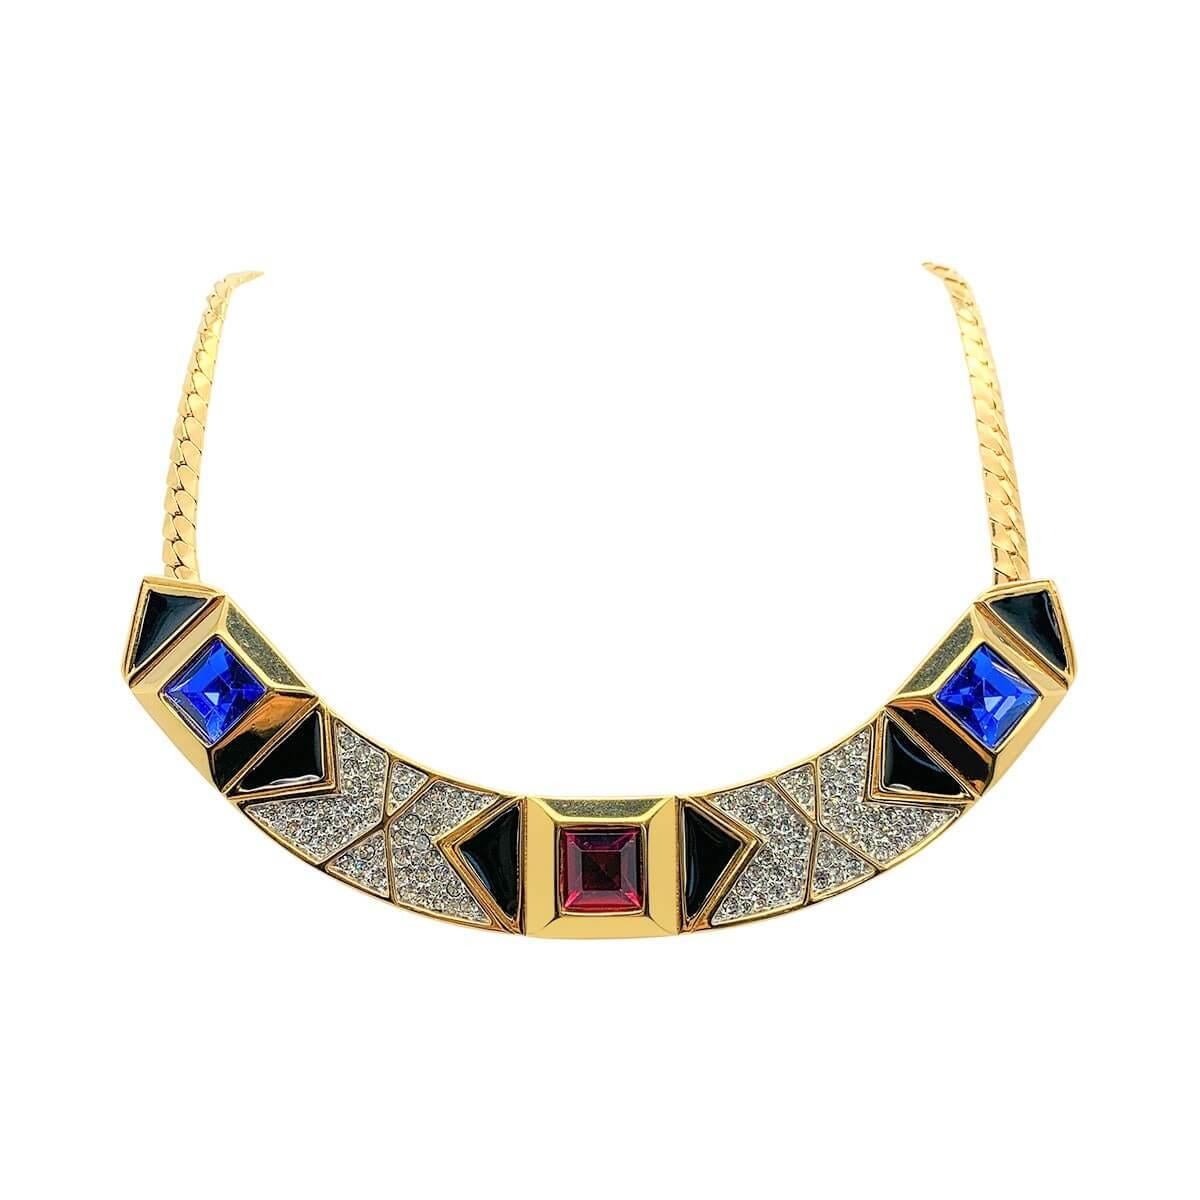 A sumptuous vintage Monet jewel necklace. Featuring crystal gem coloured stones, pave set crystals and enamel in an art deco inspired style.
Vintage Condition: Very good without damage or noteworthy wear. 
Materials: Gold plated metal, enamel, glass